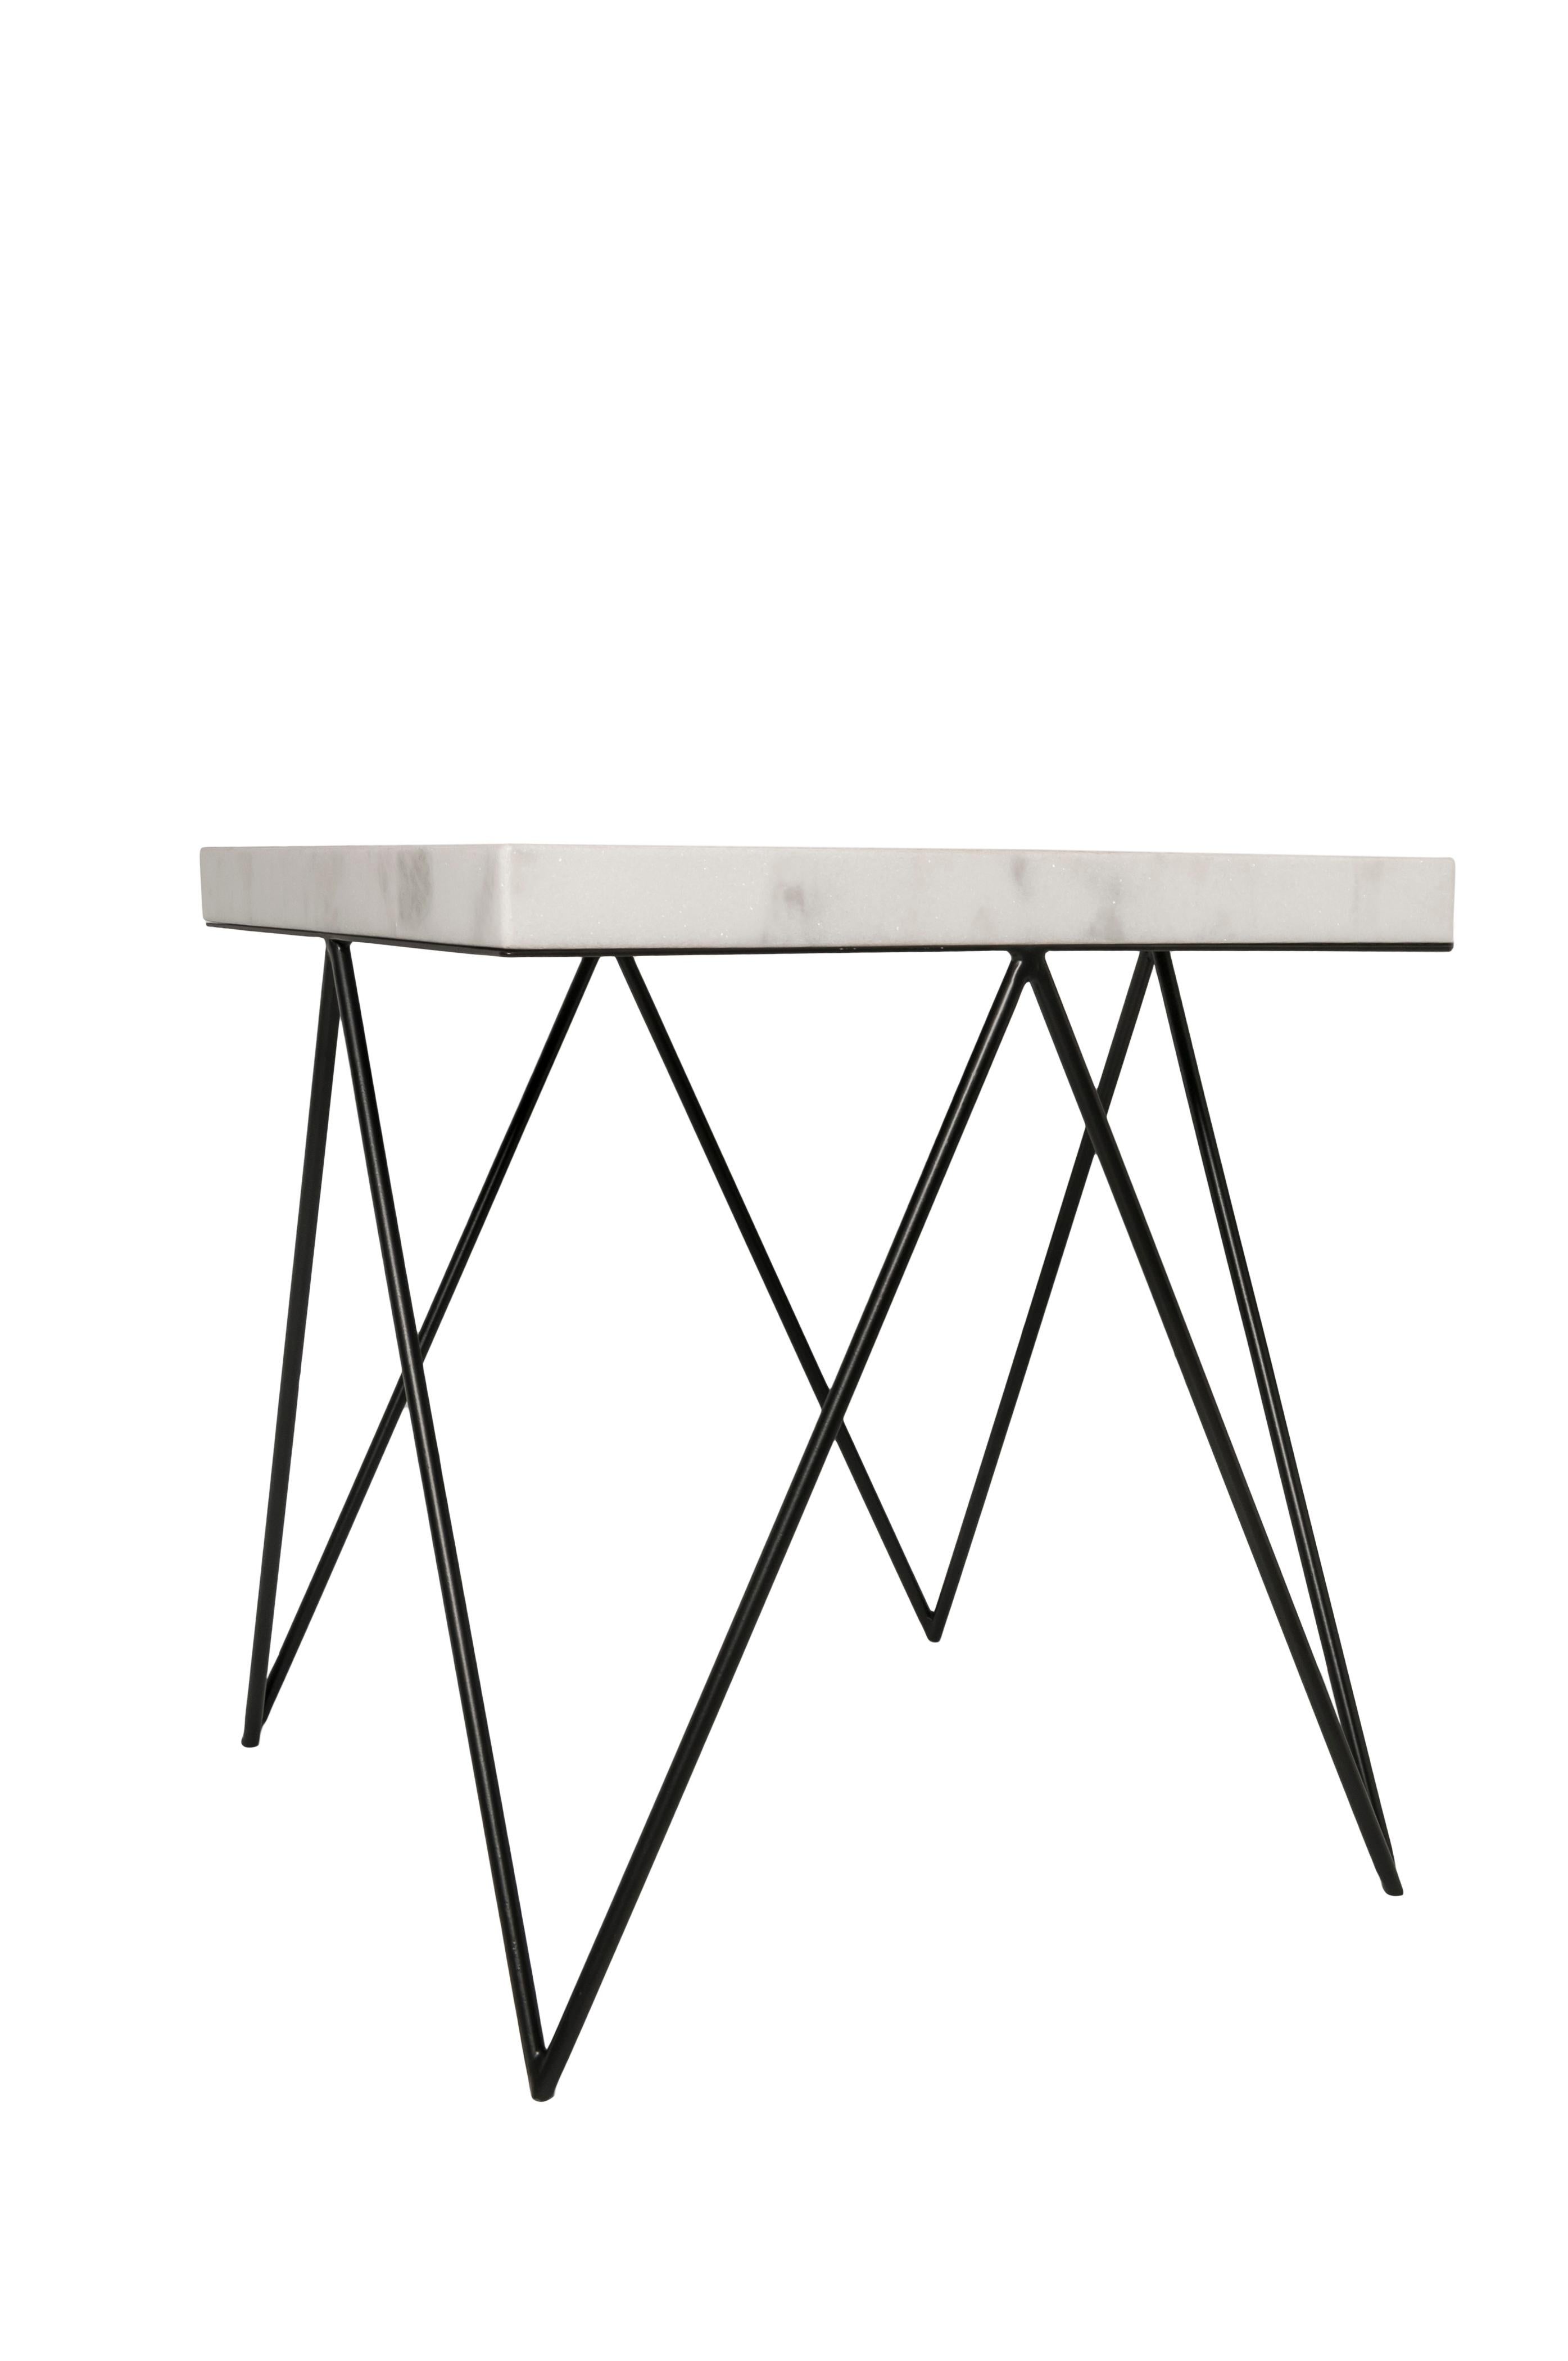 English Chakra Table by Roberta Rampazzo For Sale